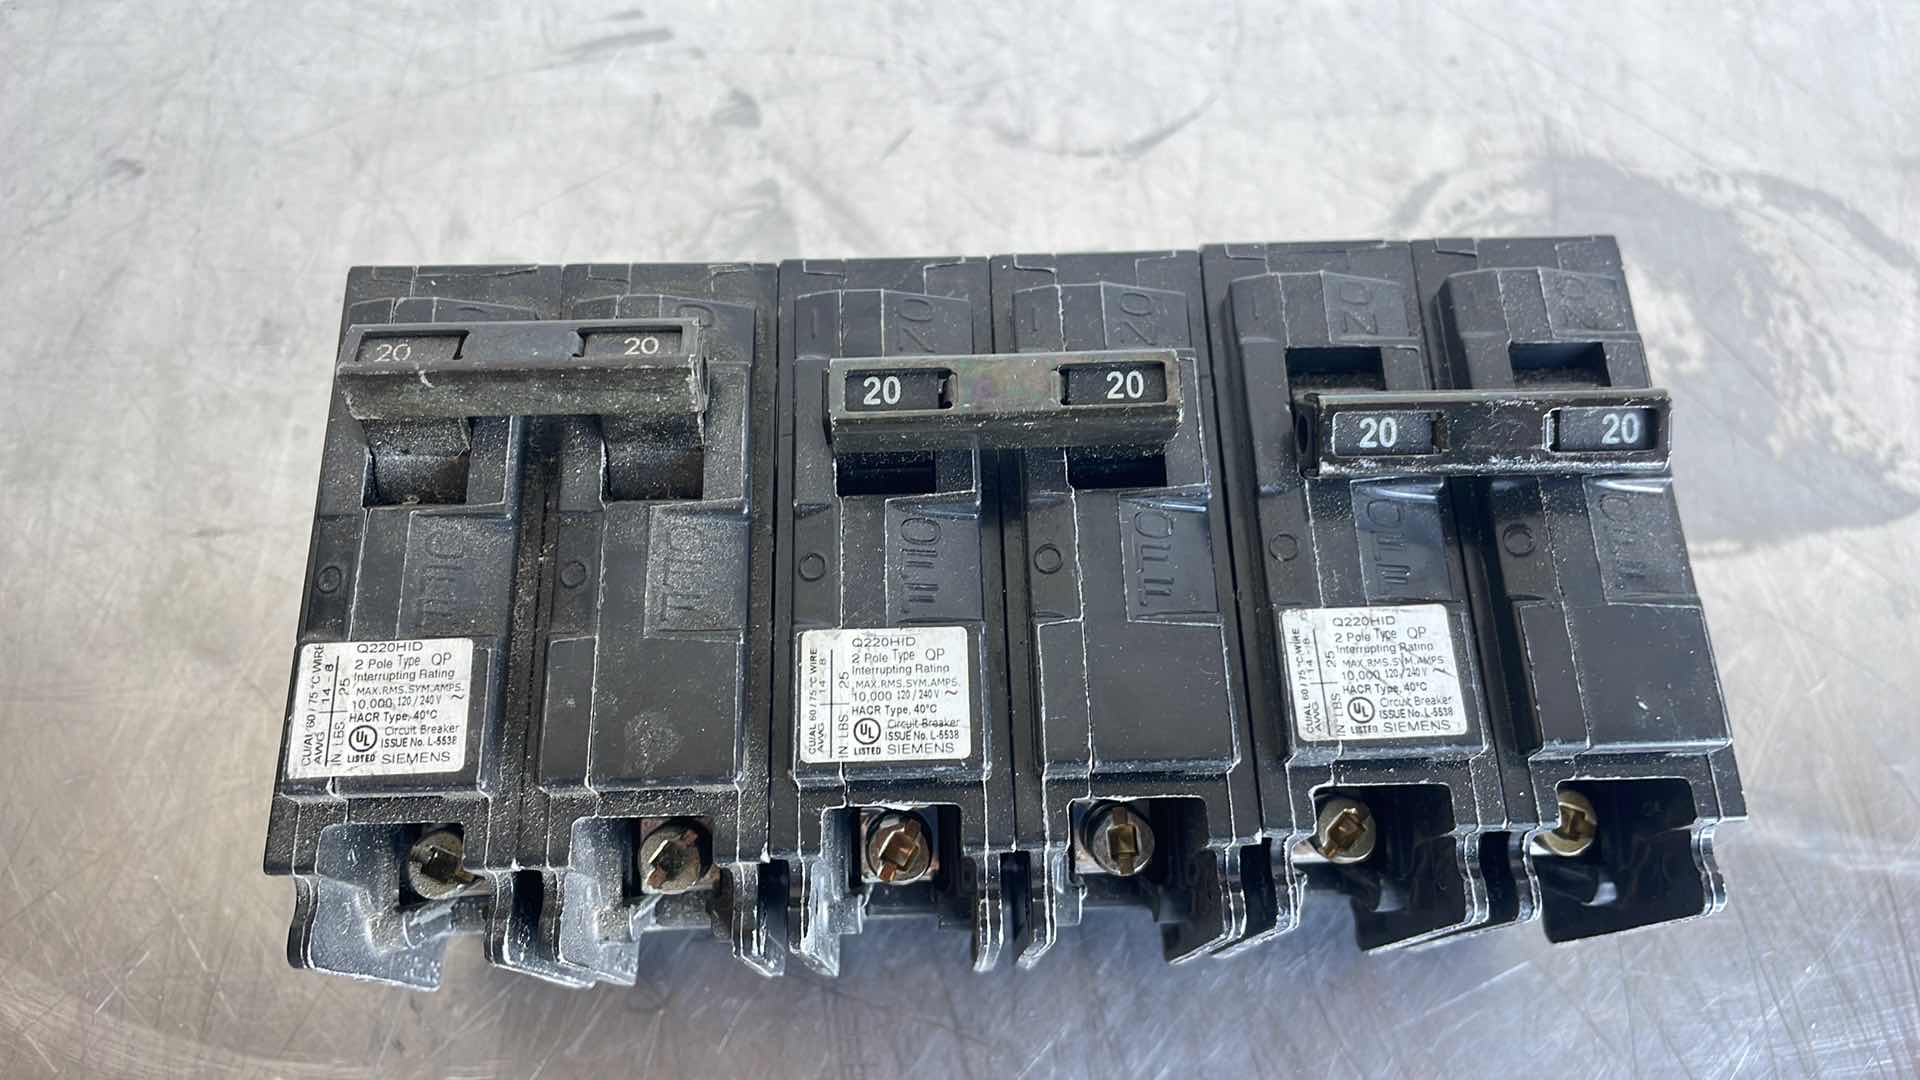 Photo 2 of SIEMENS Q220HID CIRCUIT BREAKER, 20 AMP, DOUBLE POLE, FOR HID LIGHTING (3)